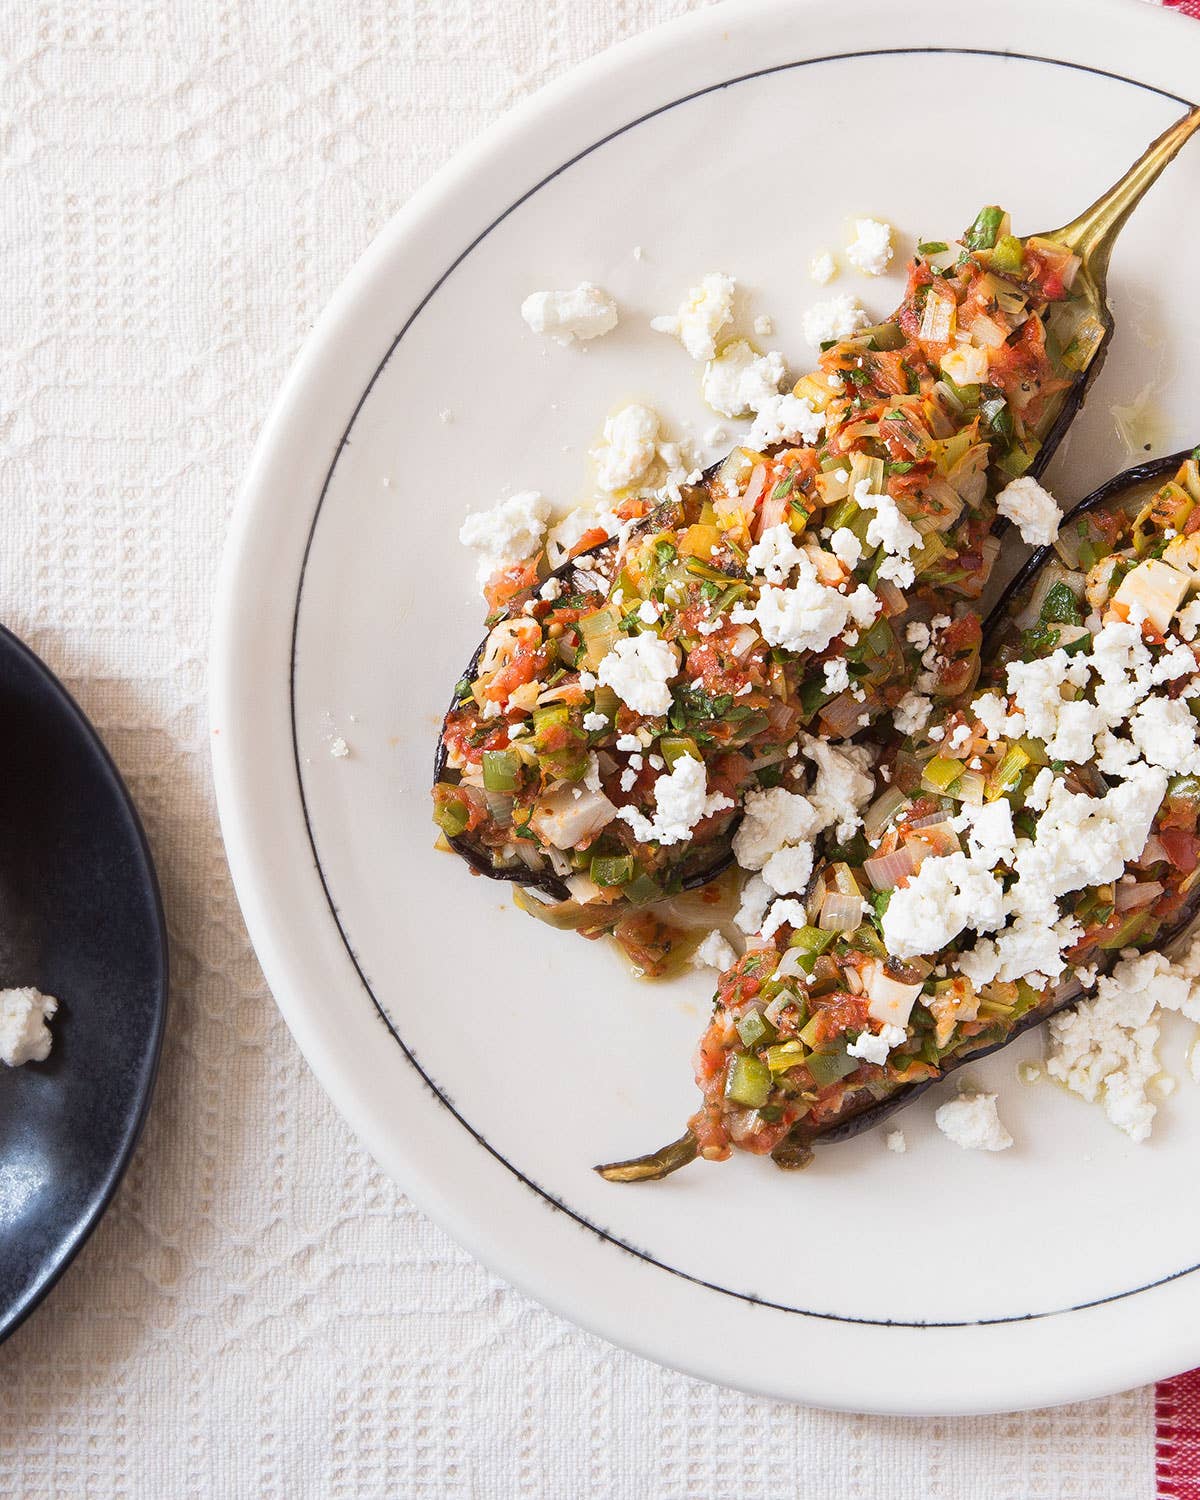 Stuff an Eggplant with All Your Favorite Vegetables Tonight